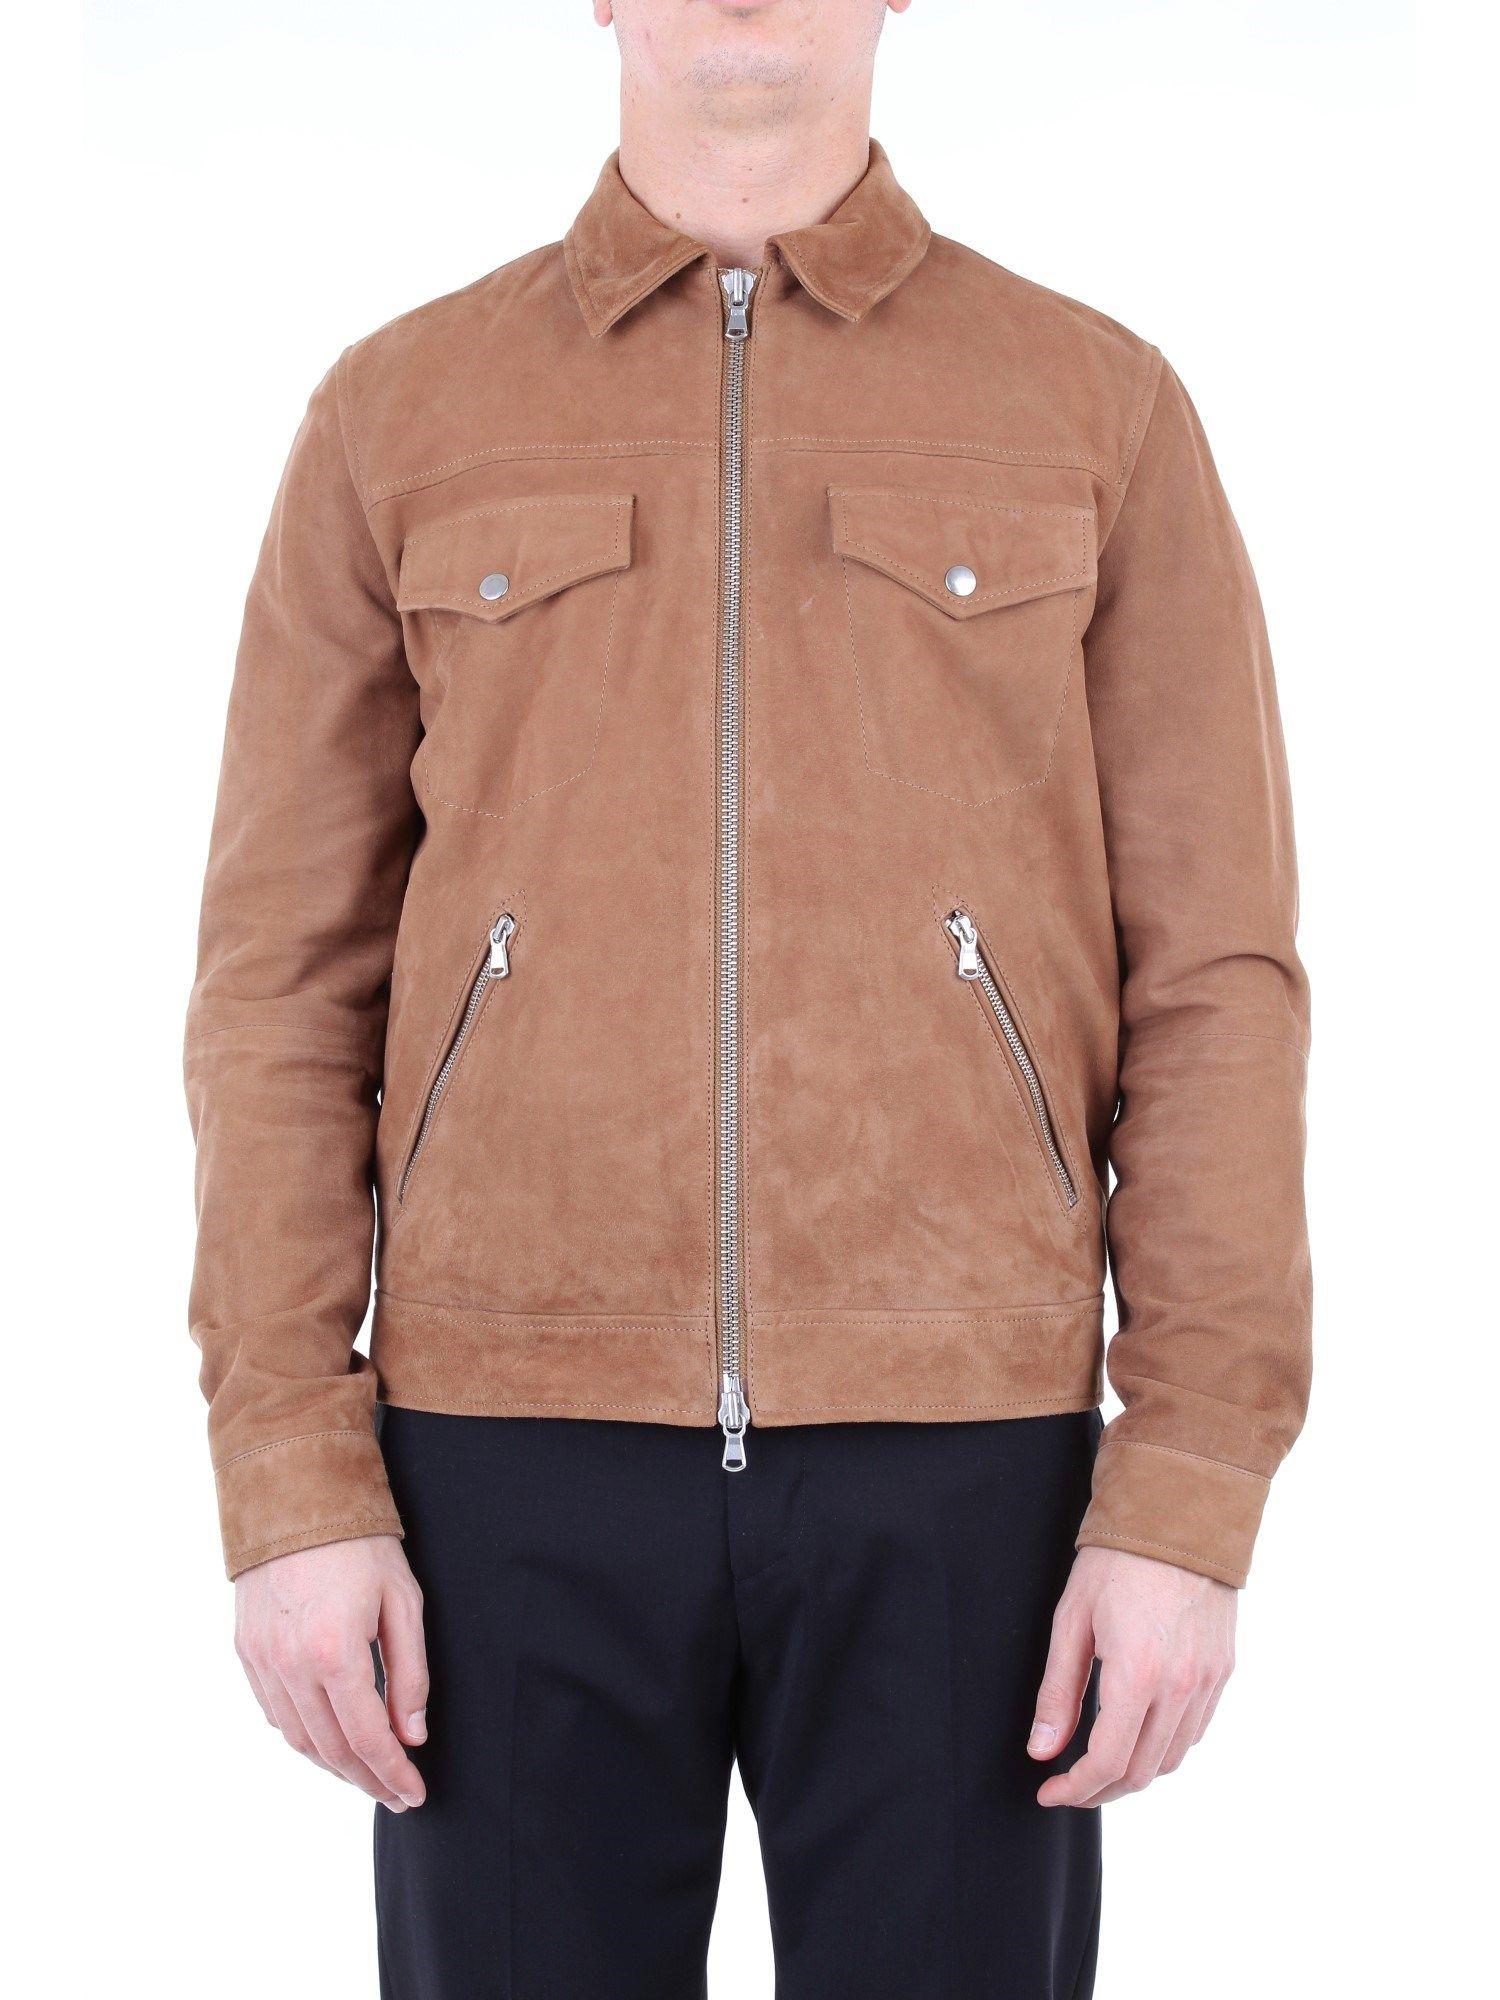 Mauro Grifoni Brown Leather Outerwear Jacket for Men - Lyst